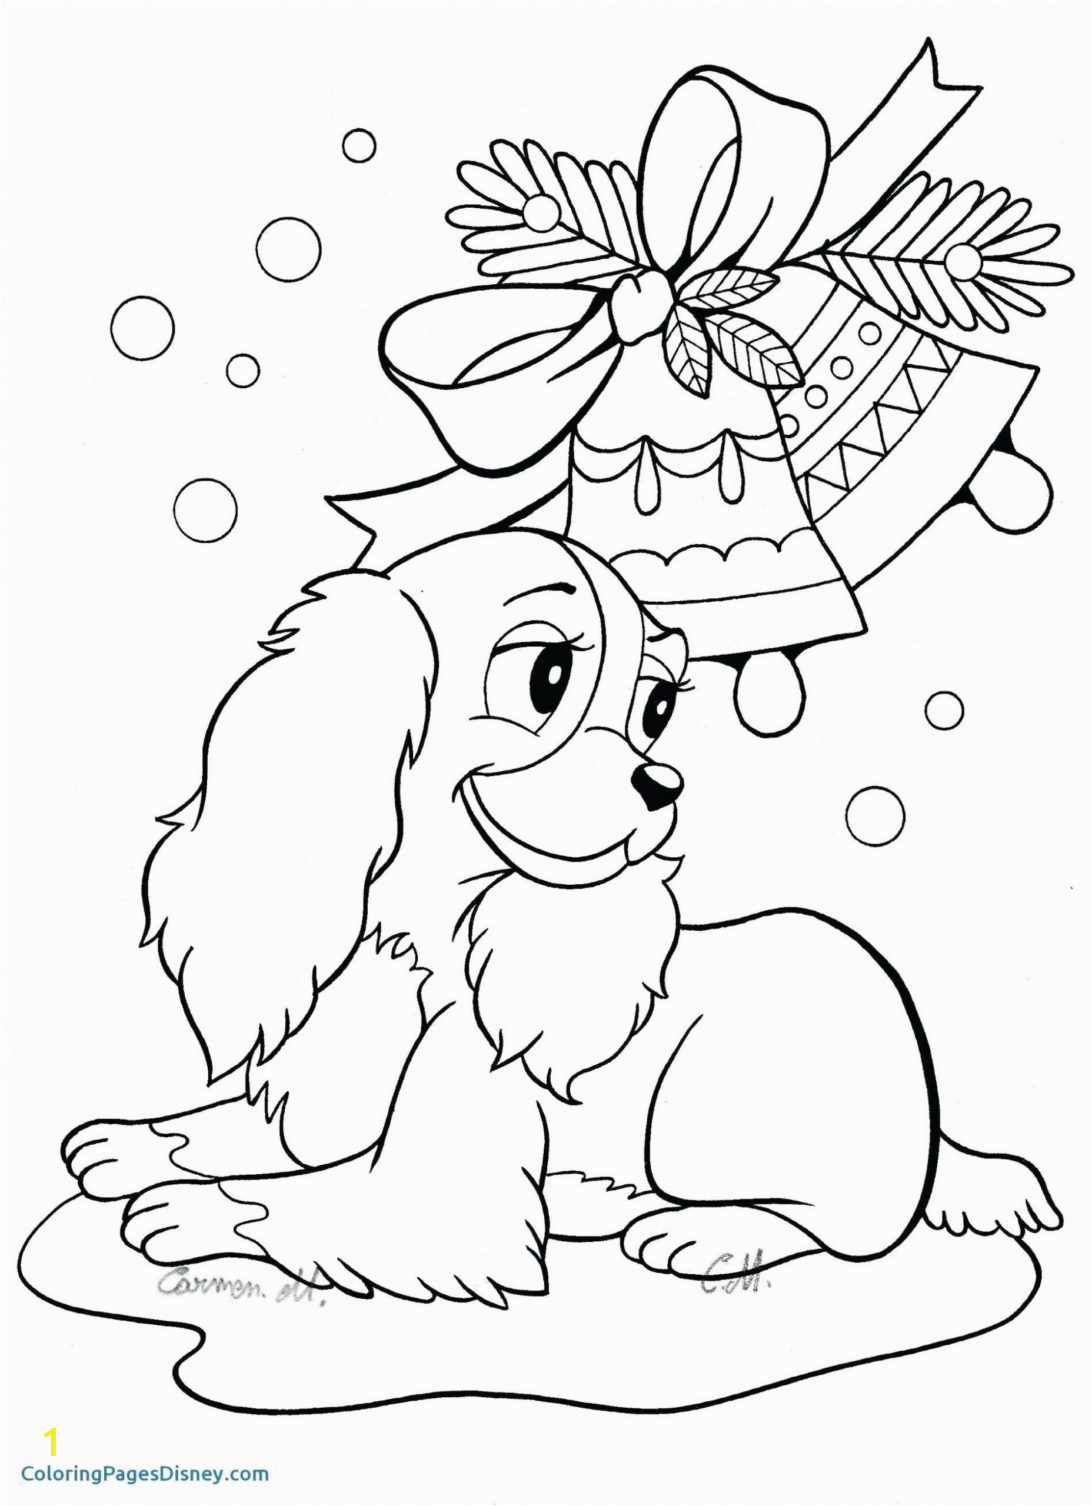 princess coloring pages for kids spring animals clash royale doodle fusion easy mandala nutcracker page zen summer worksheets christmas colouring children horse in 1092x1506